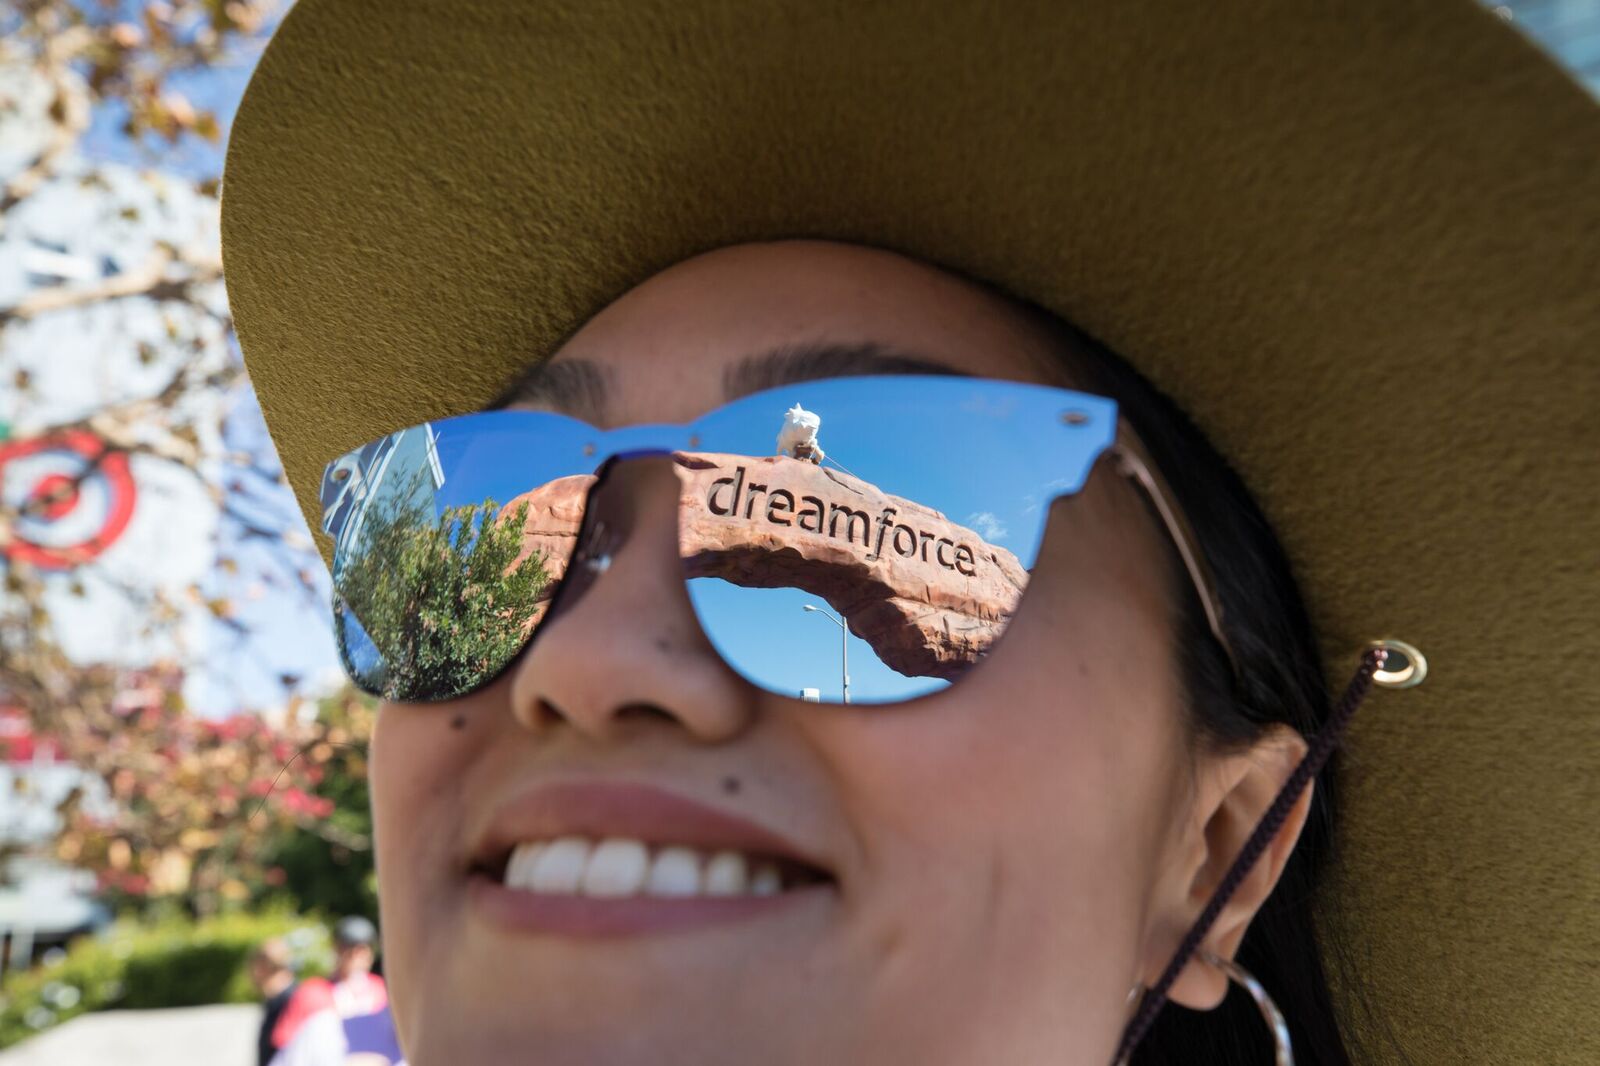 The Top 10 Moments from Dreamforce '17